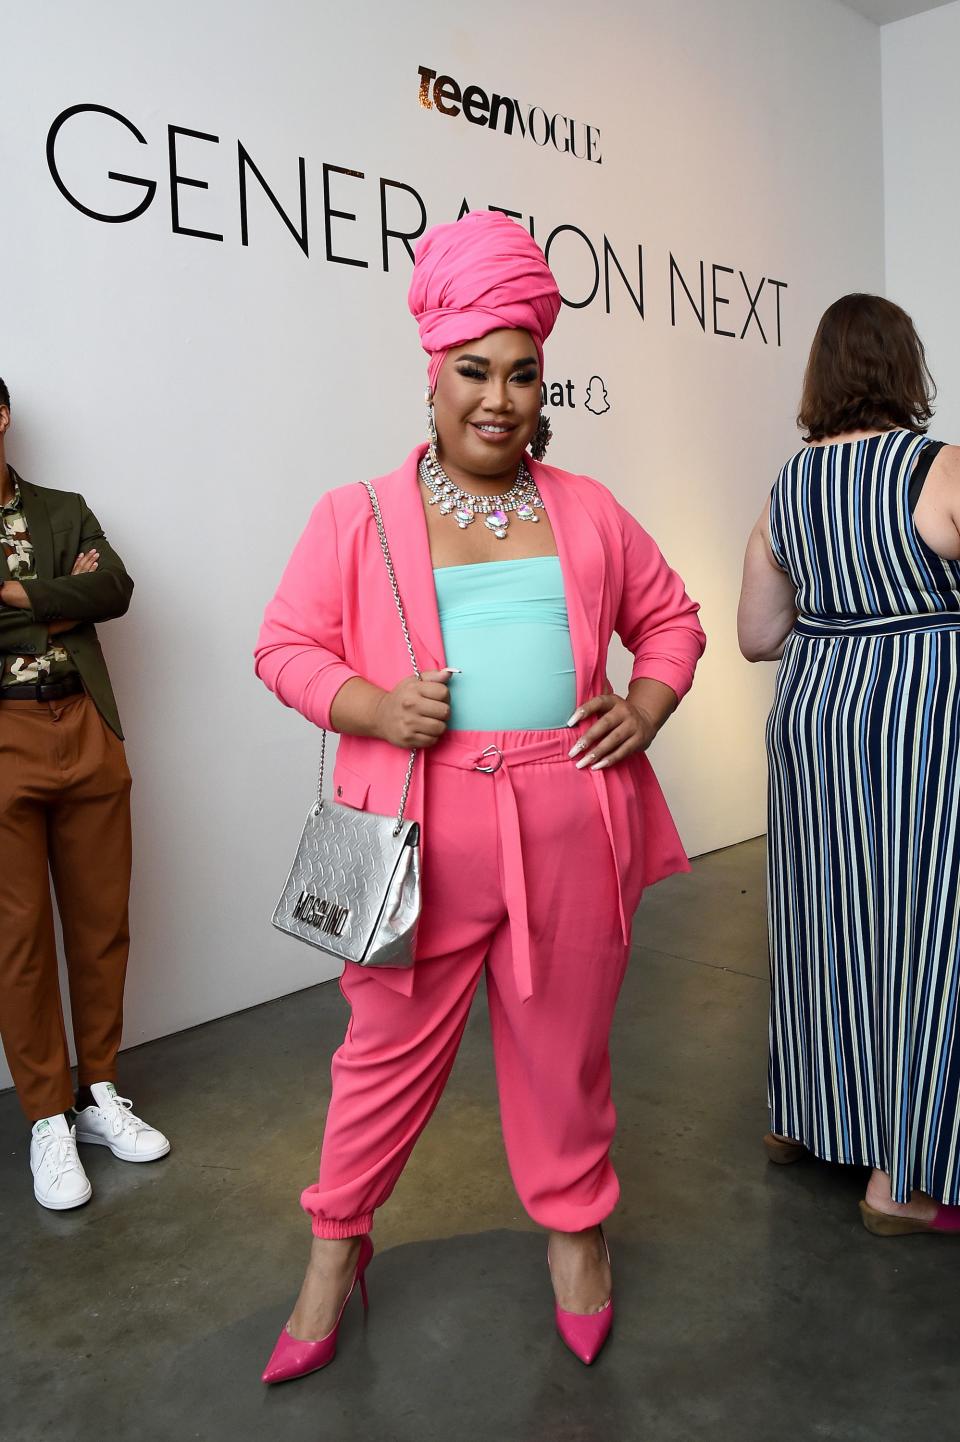 The Best Moments From Teen Vogue ’s Generation Next Presentation at NYFW 2019